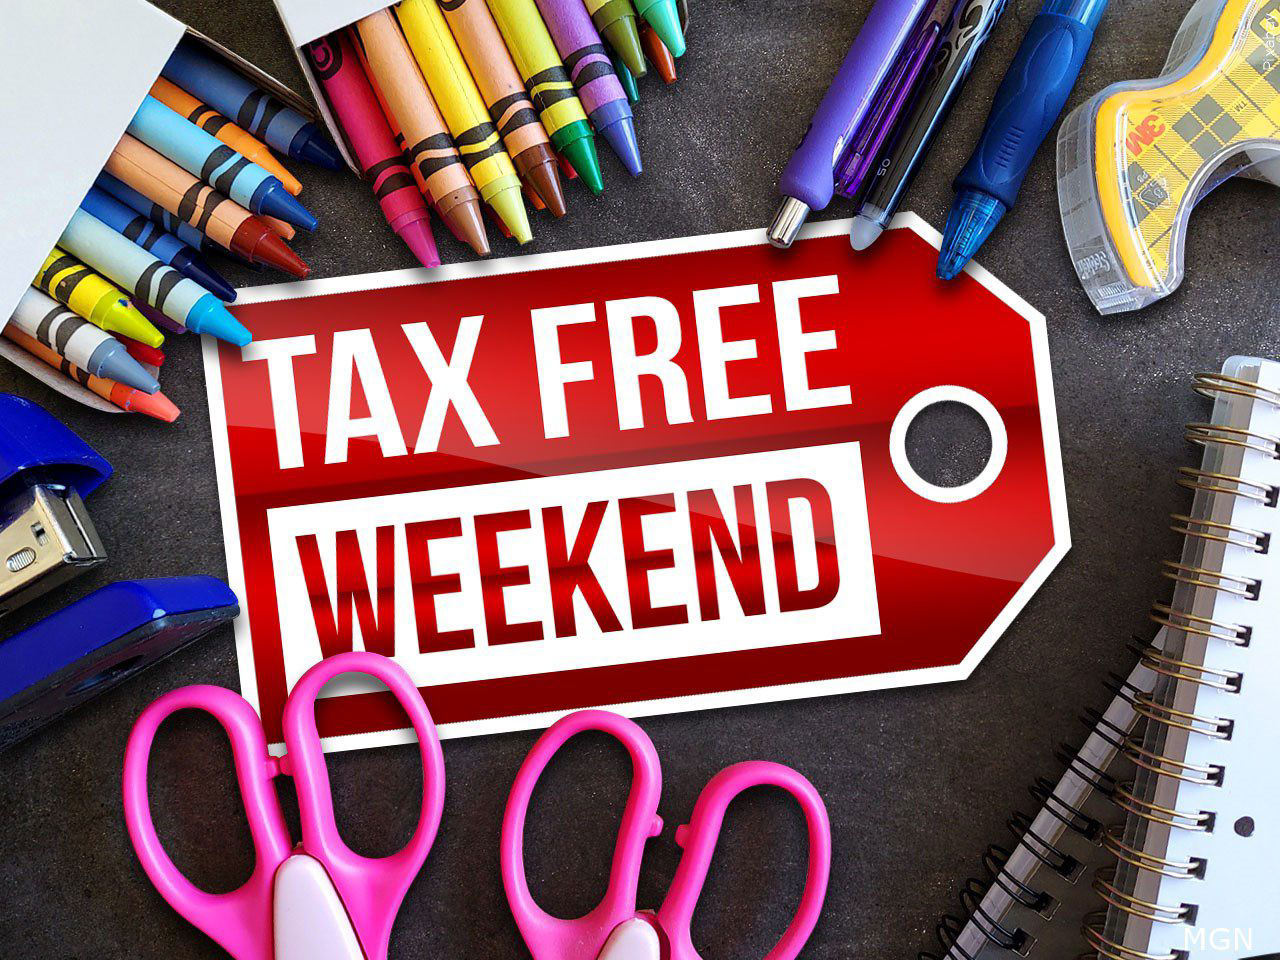 Texas TaxFree weekend List of items that are taxable and what’s not